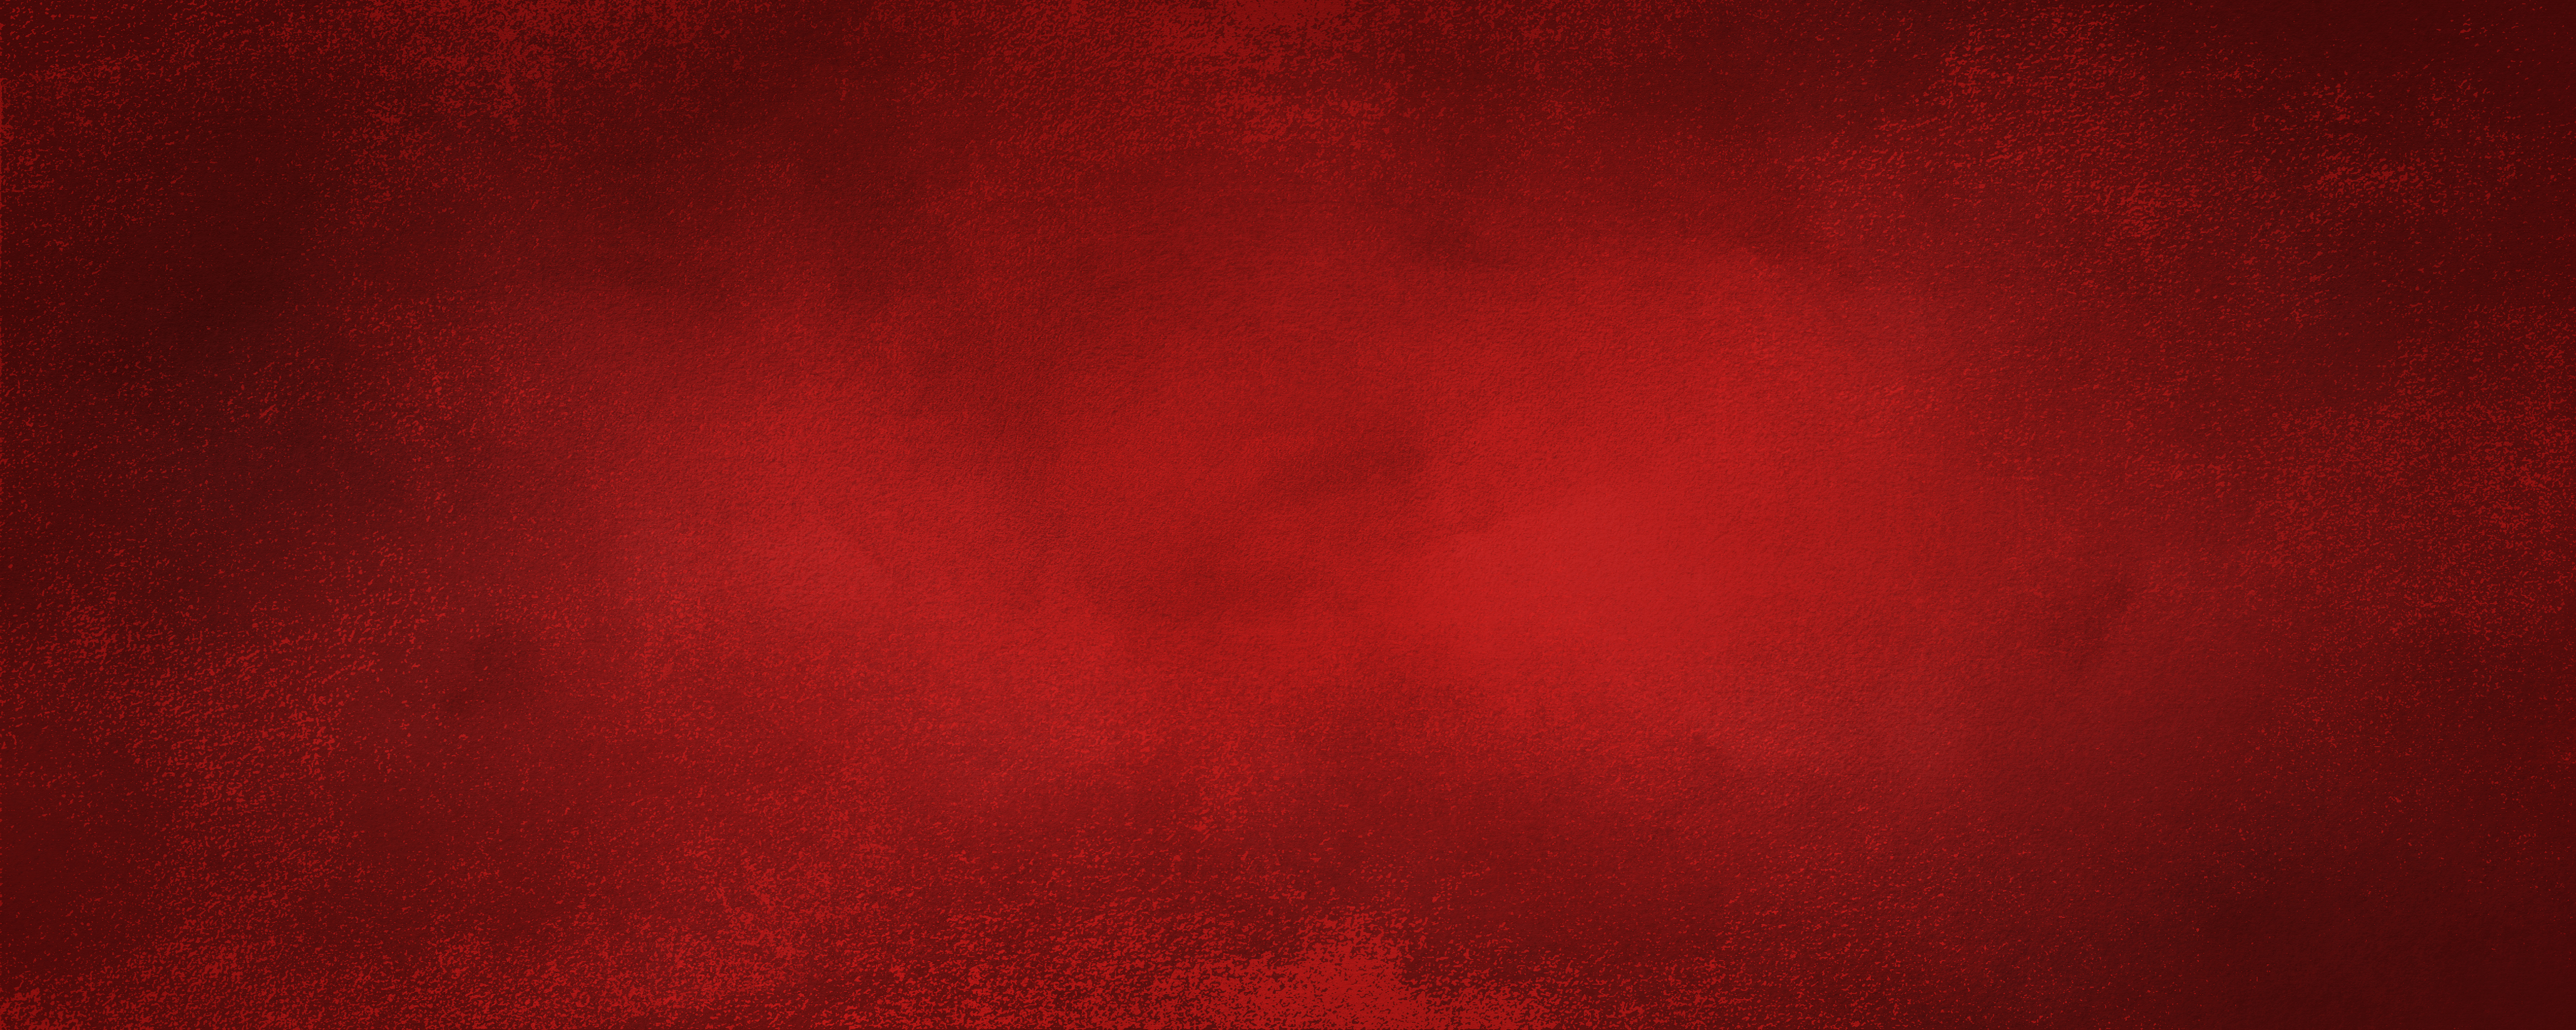 Red Paper Texture Background 